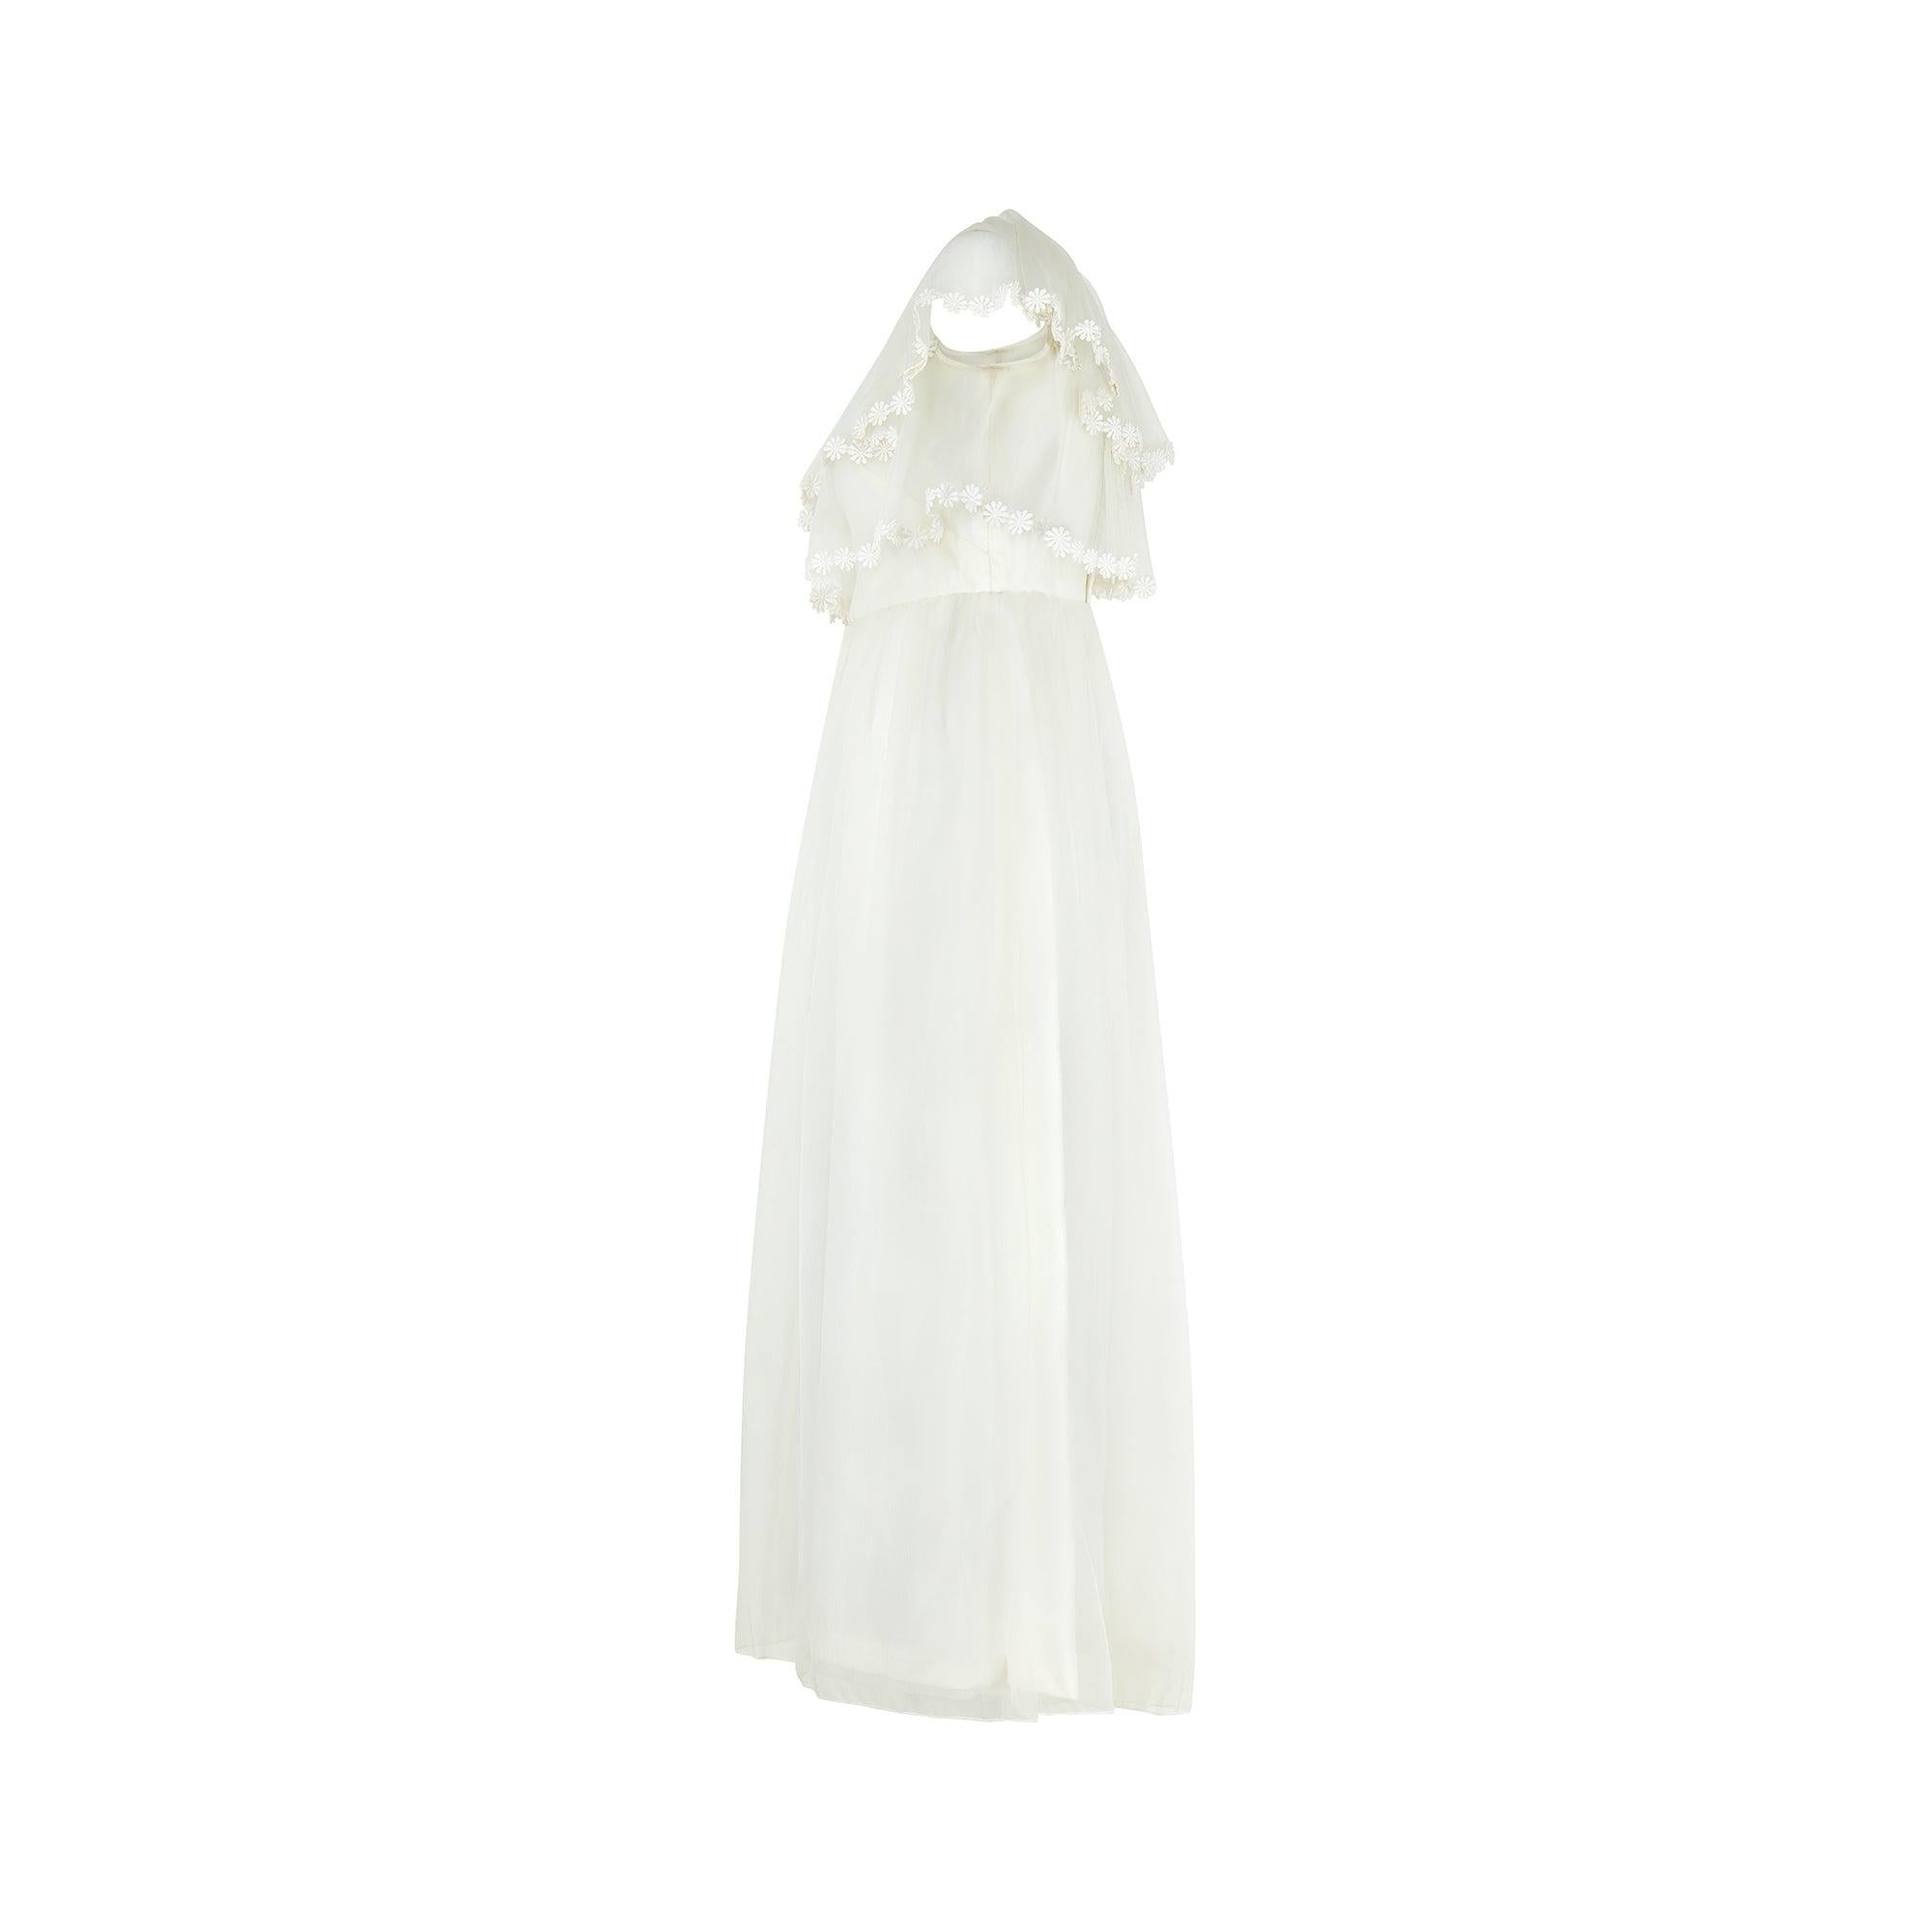 I'm almost certain that this is a late 1960s wedding dress by Jean Varon who's designer, John Bates, was one of the best British fashion designers of his day and retailed at Harrods. With its sleeveless cut and wide boat-neck, this pretty summer